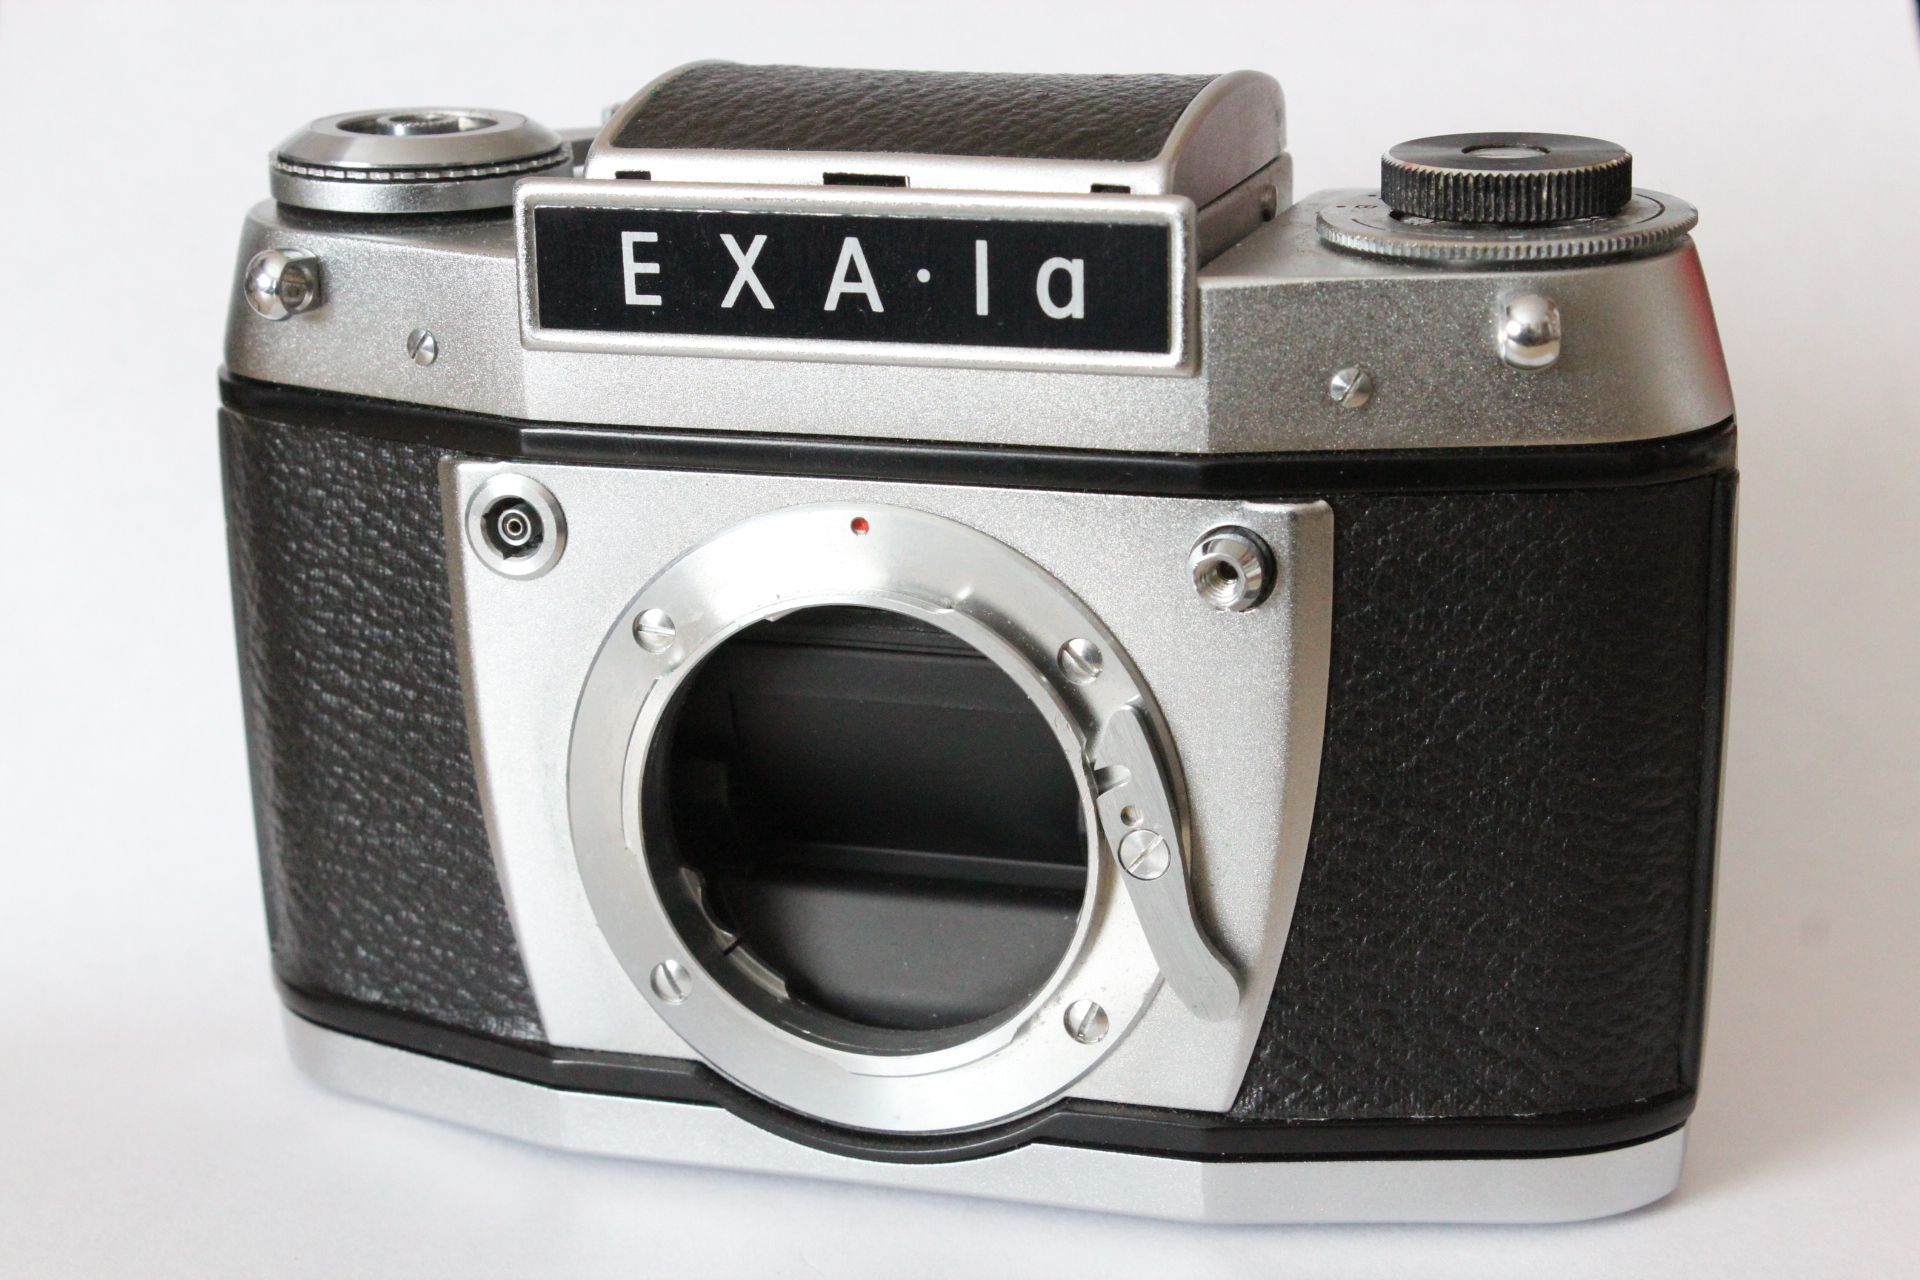 Exa 1a 35mm film SLR Camera Body With Waist Level Viewfinder - PHOTOCapital